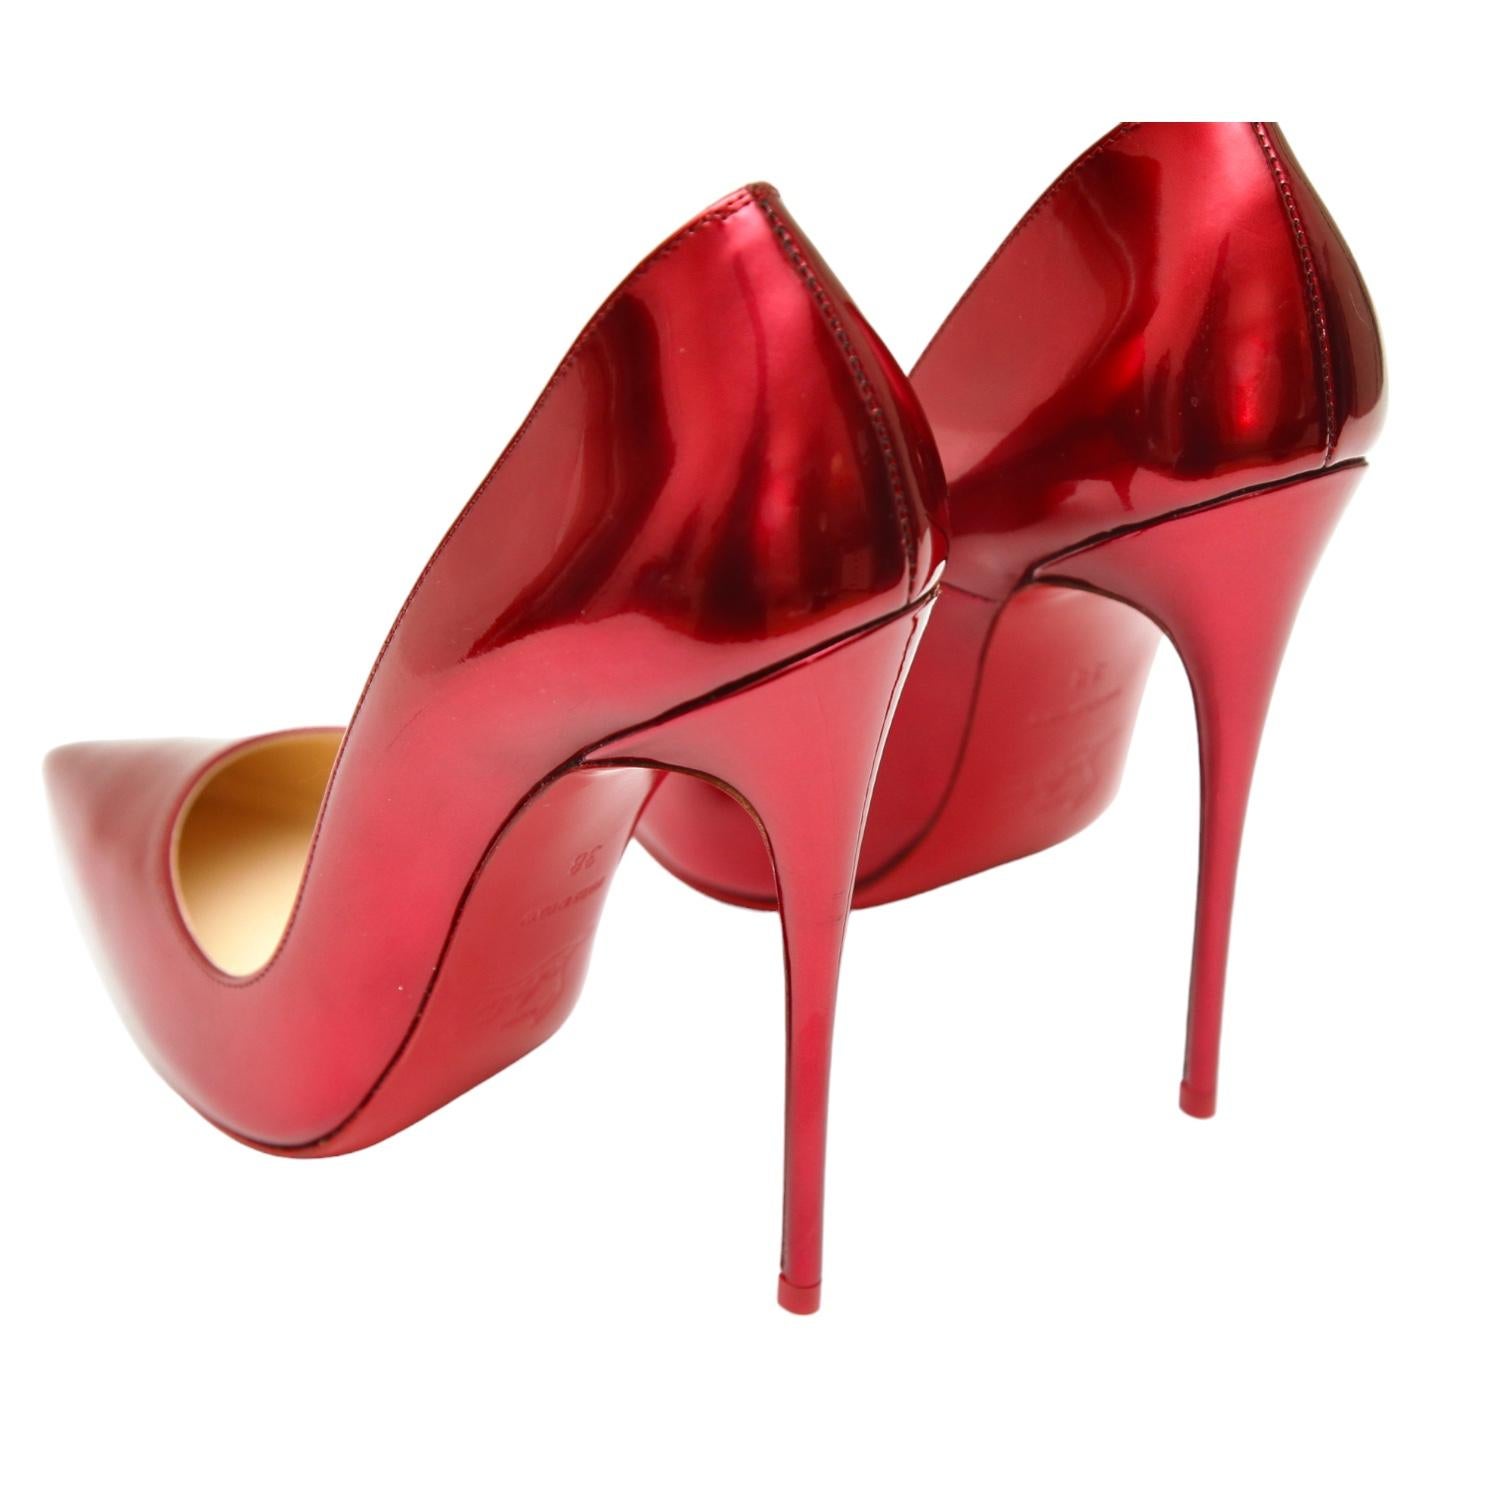 CHRISTIAN LOUBOUTIN So Kate 120 Red Patent Leather Pump Pointed Toe 38 5